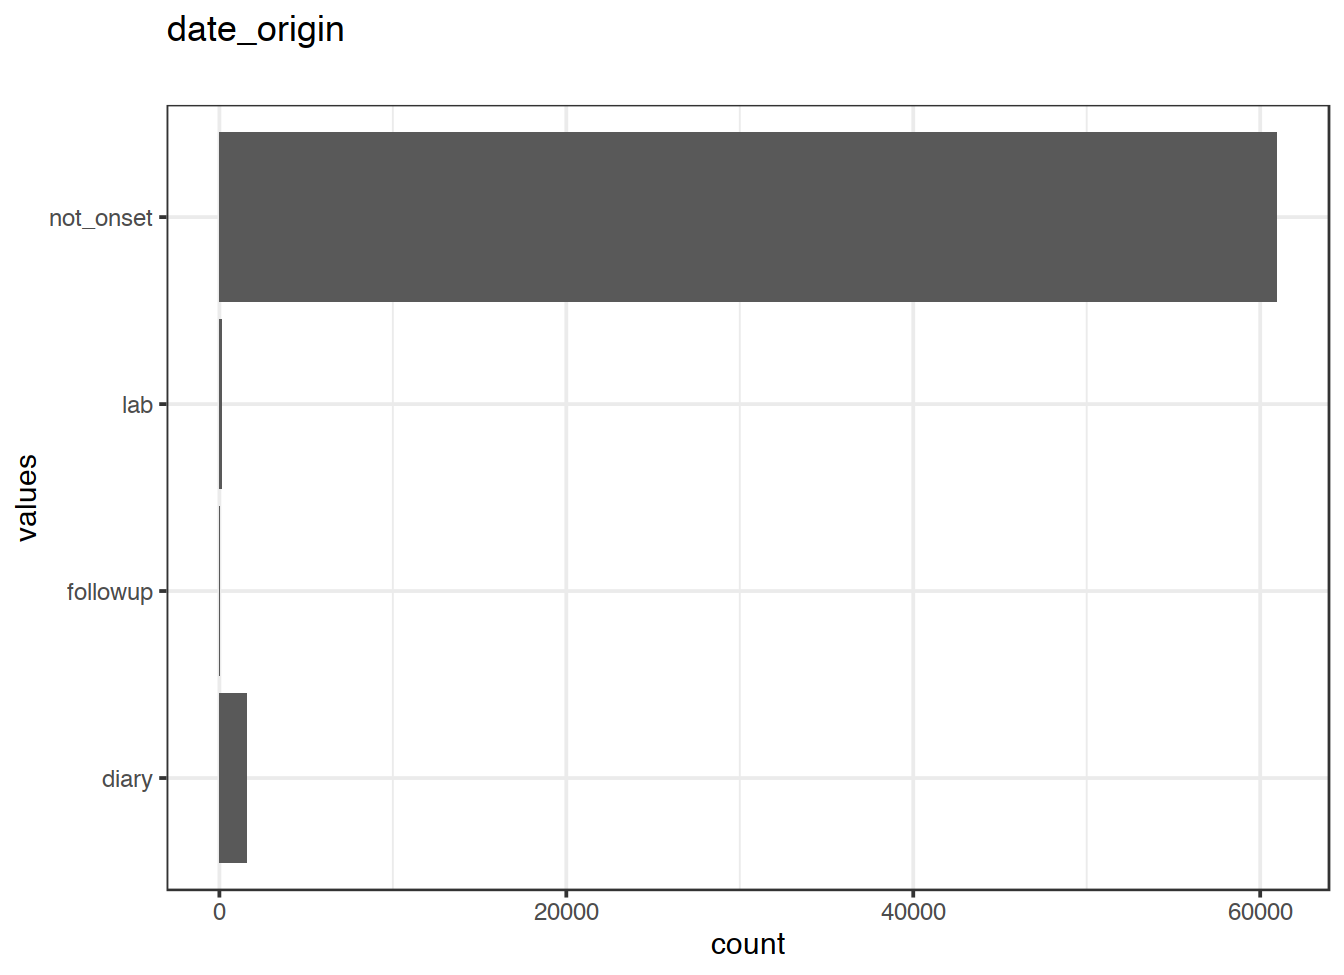 Distribution of values for date_origin